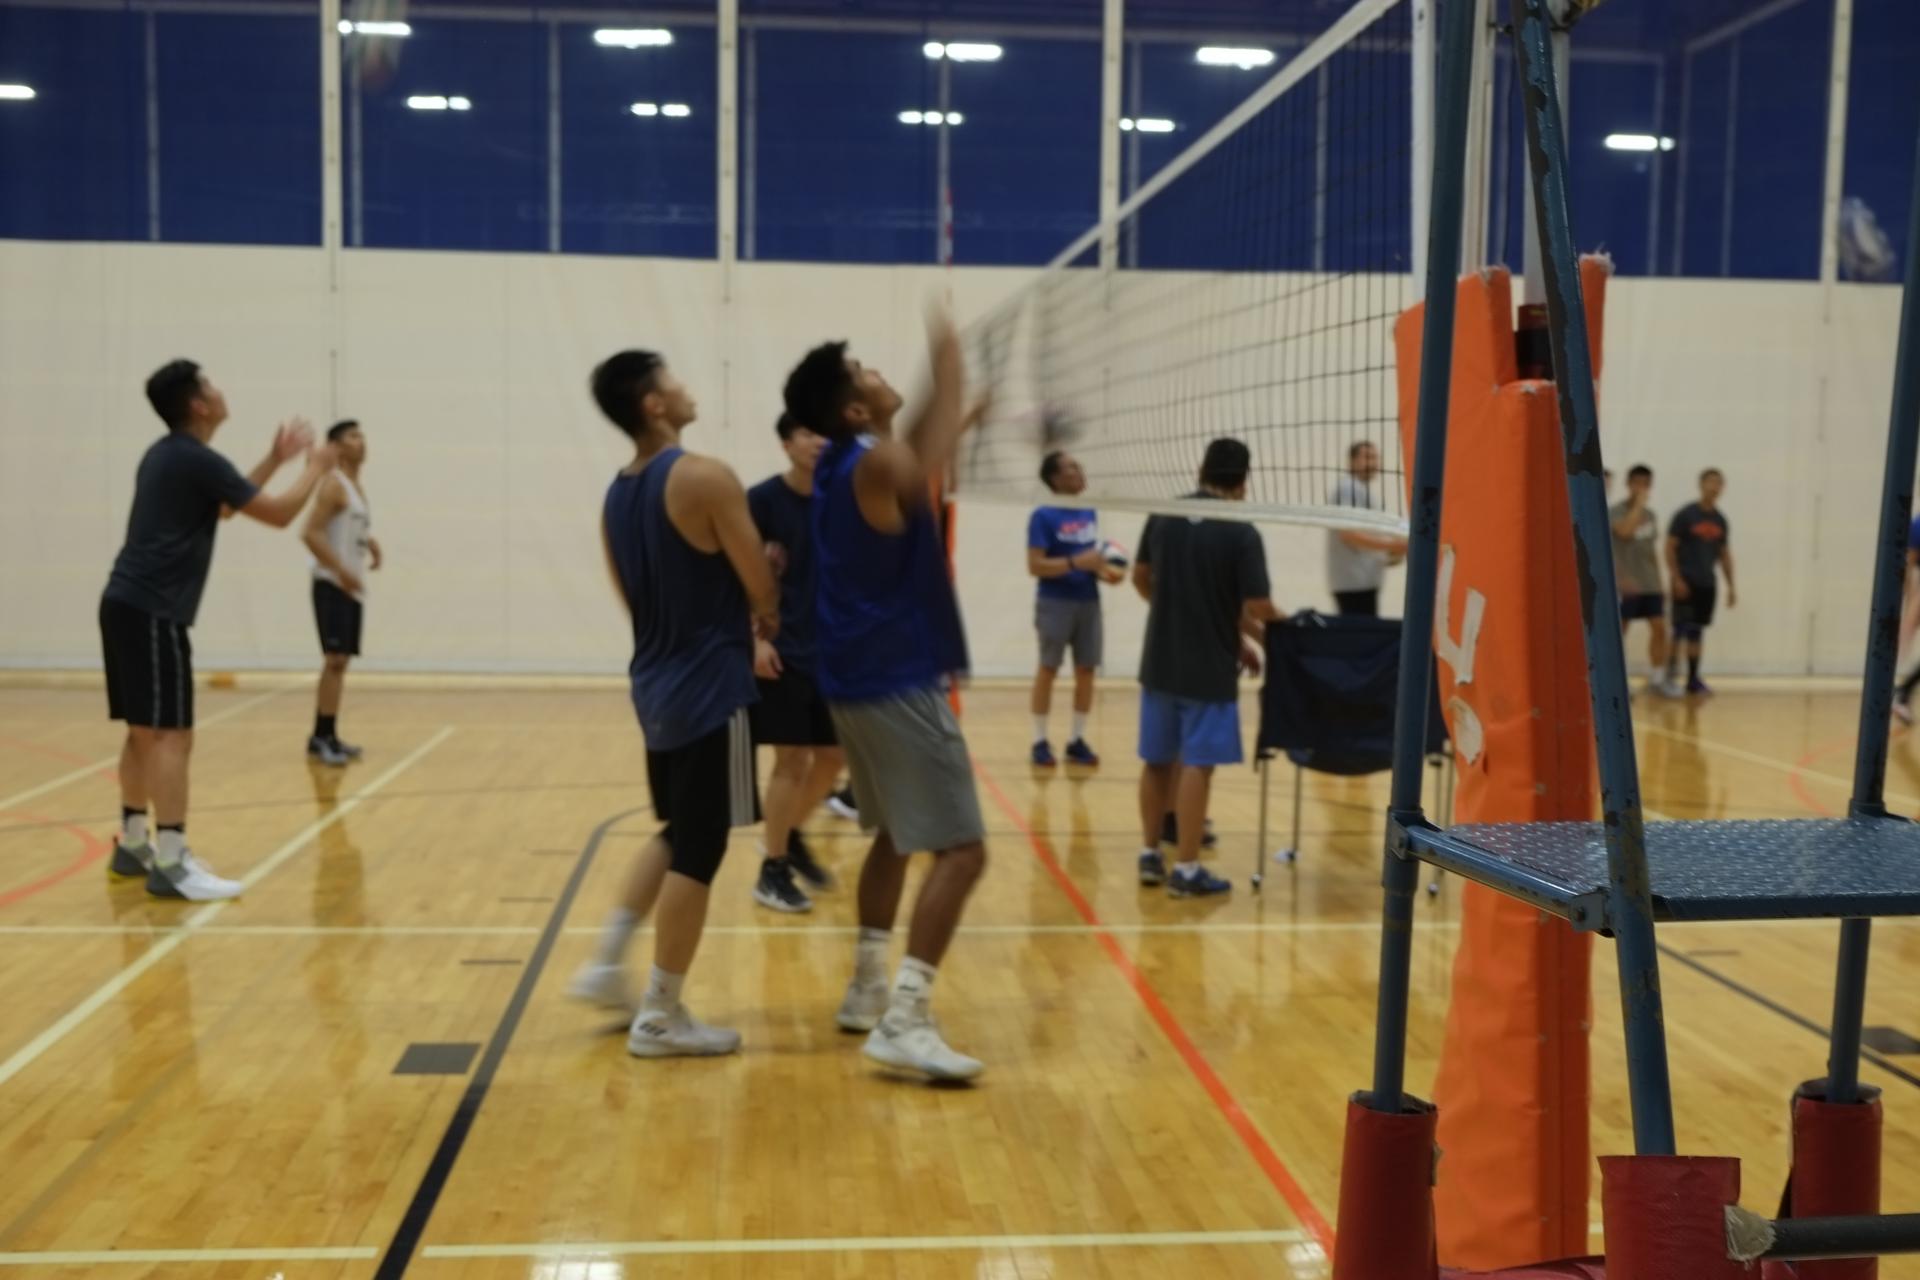 Asian men play a volleyball game in uniforms on a court